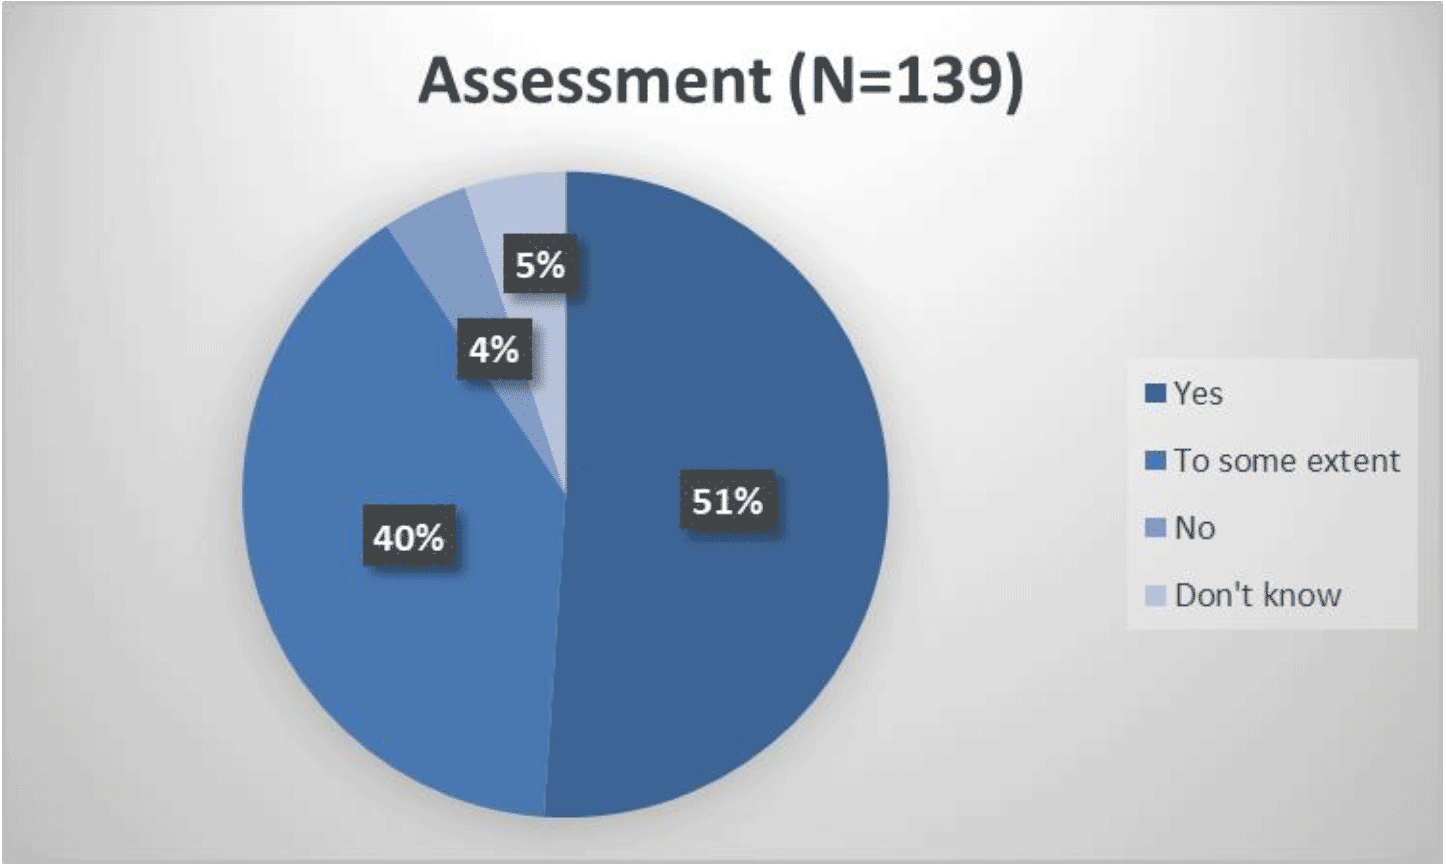 Pie chart showing responses to whether the assessment section is sufficiently clear:
Yes 51%
To some extent 40%
No 4%
Don't know 5%
